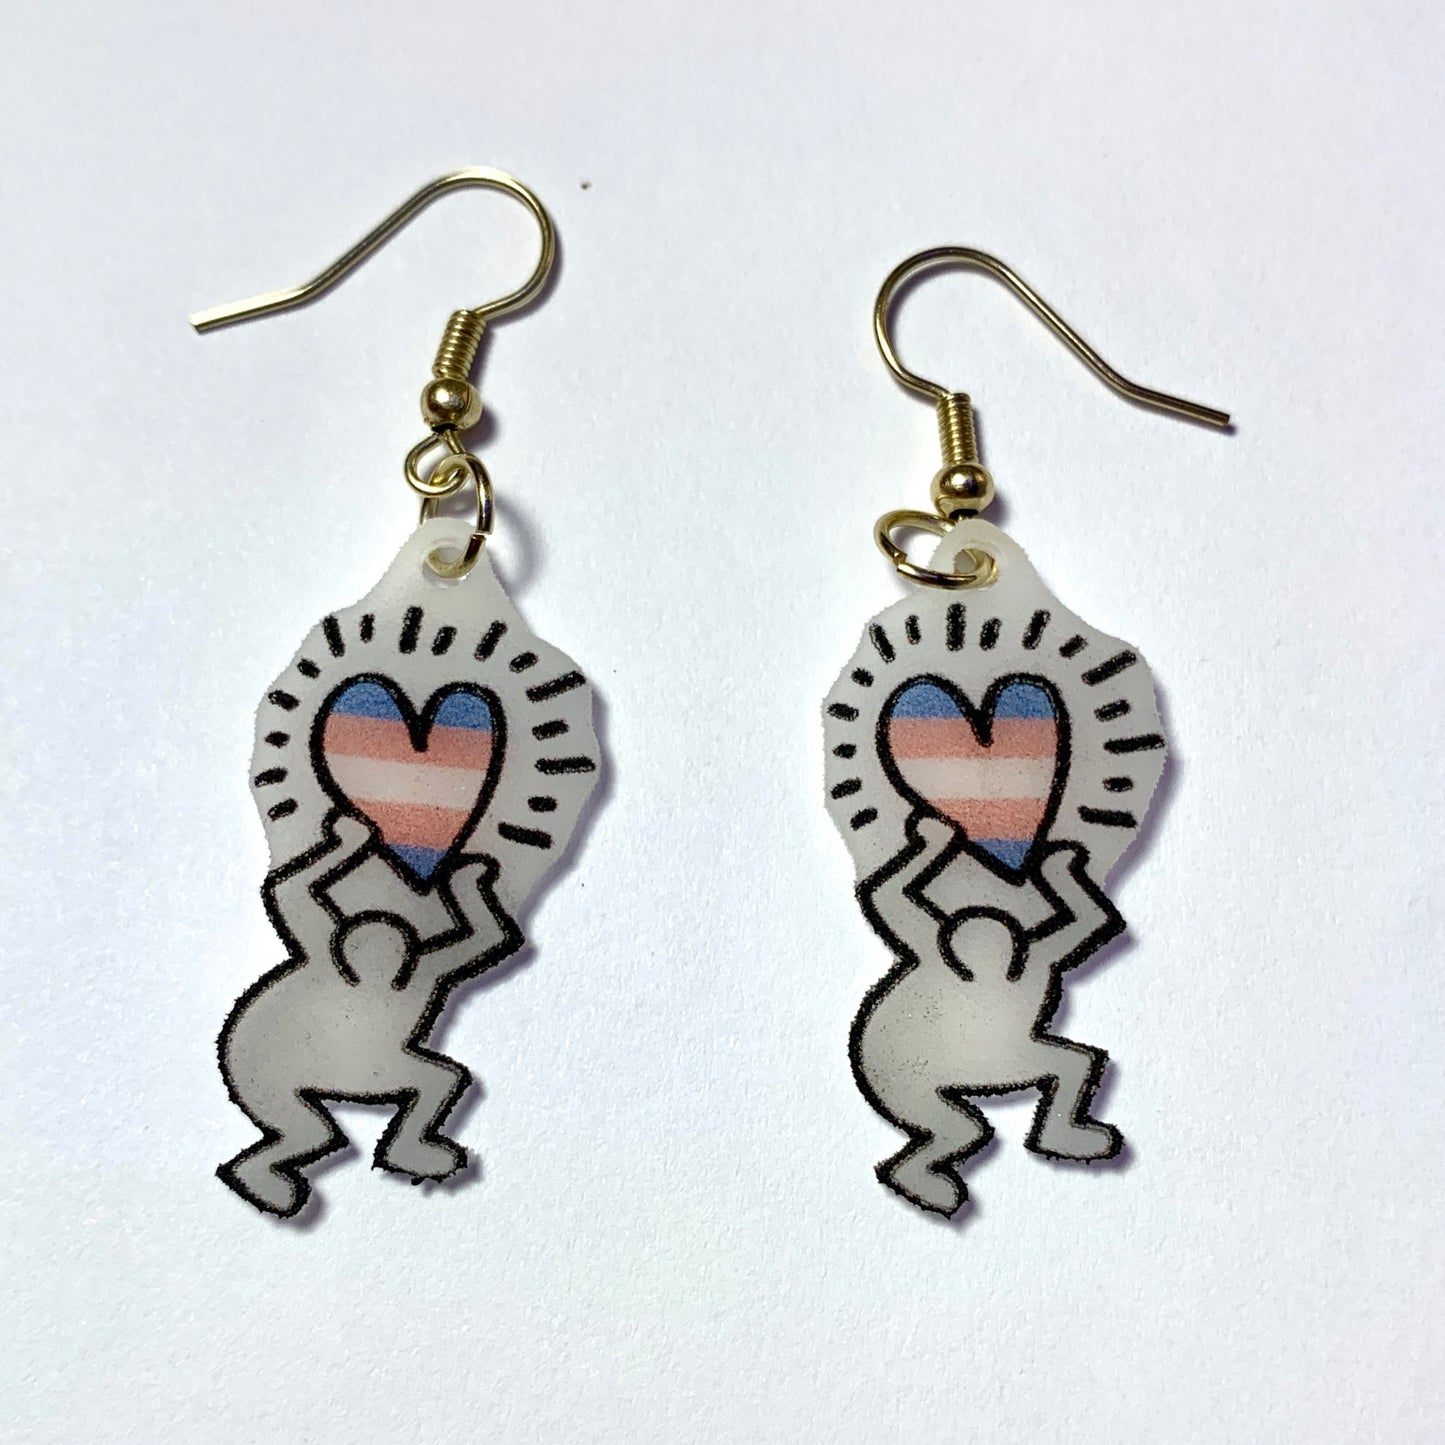 Keith Haring Inspired Gay Heart Character Earrings!